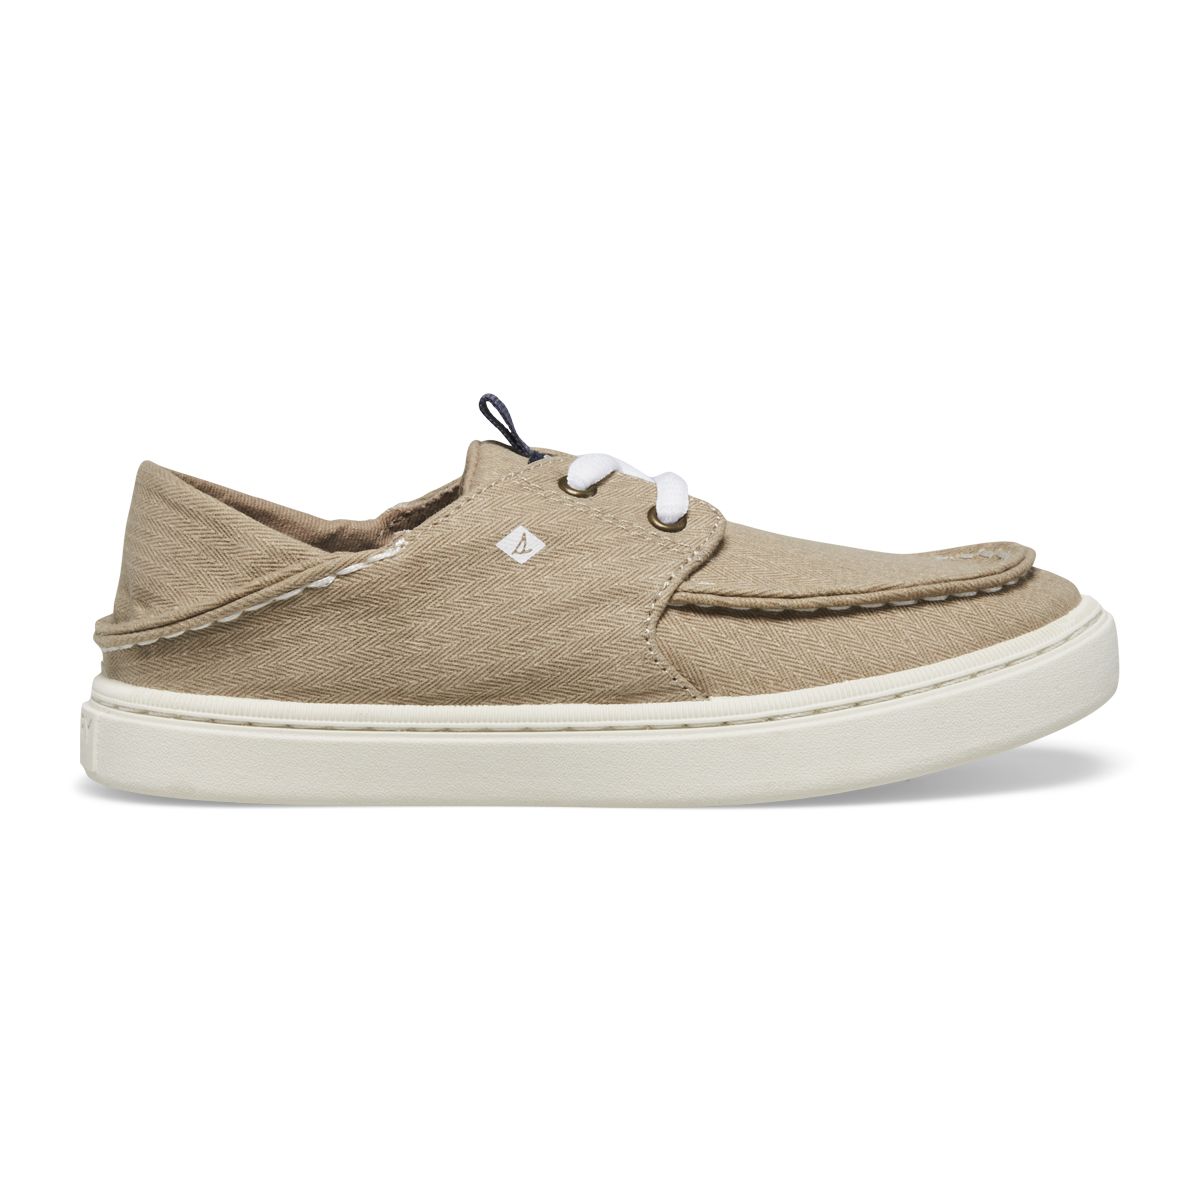 Kids' Top-Sider Shoes on Sale: Discount Boys' & Girls' Shoes | Sperry